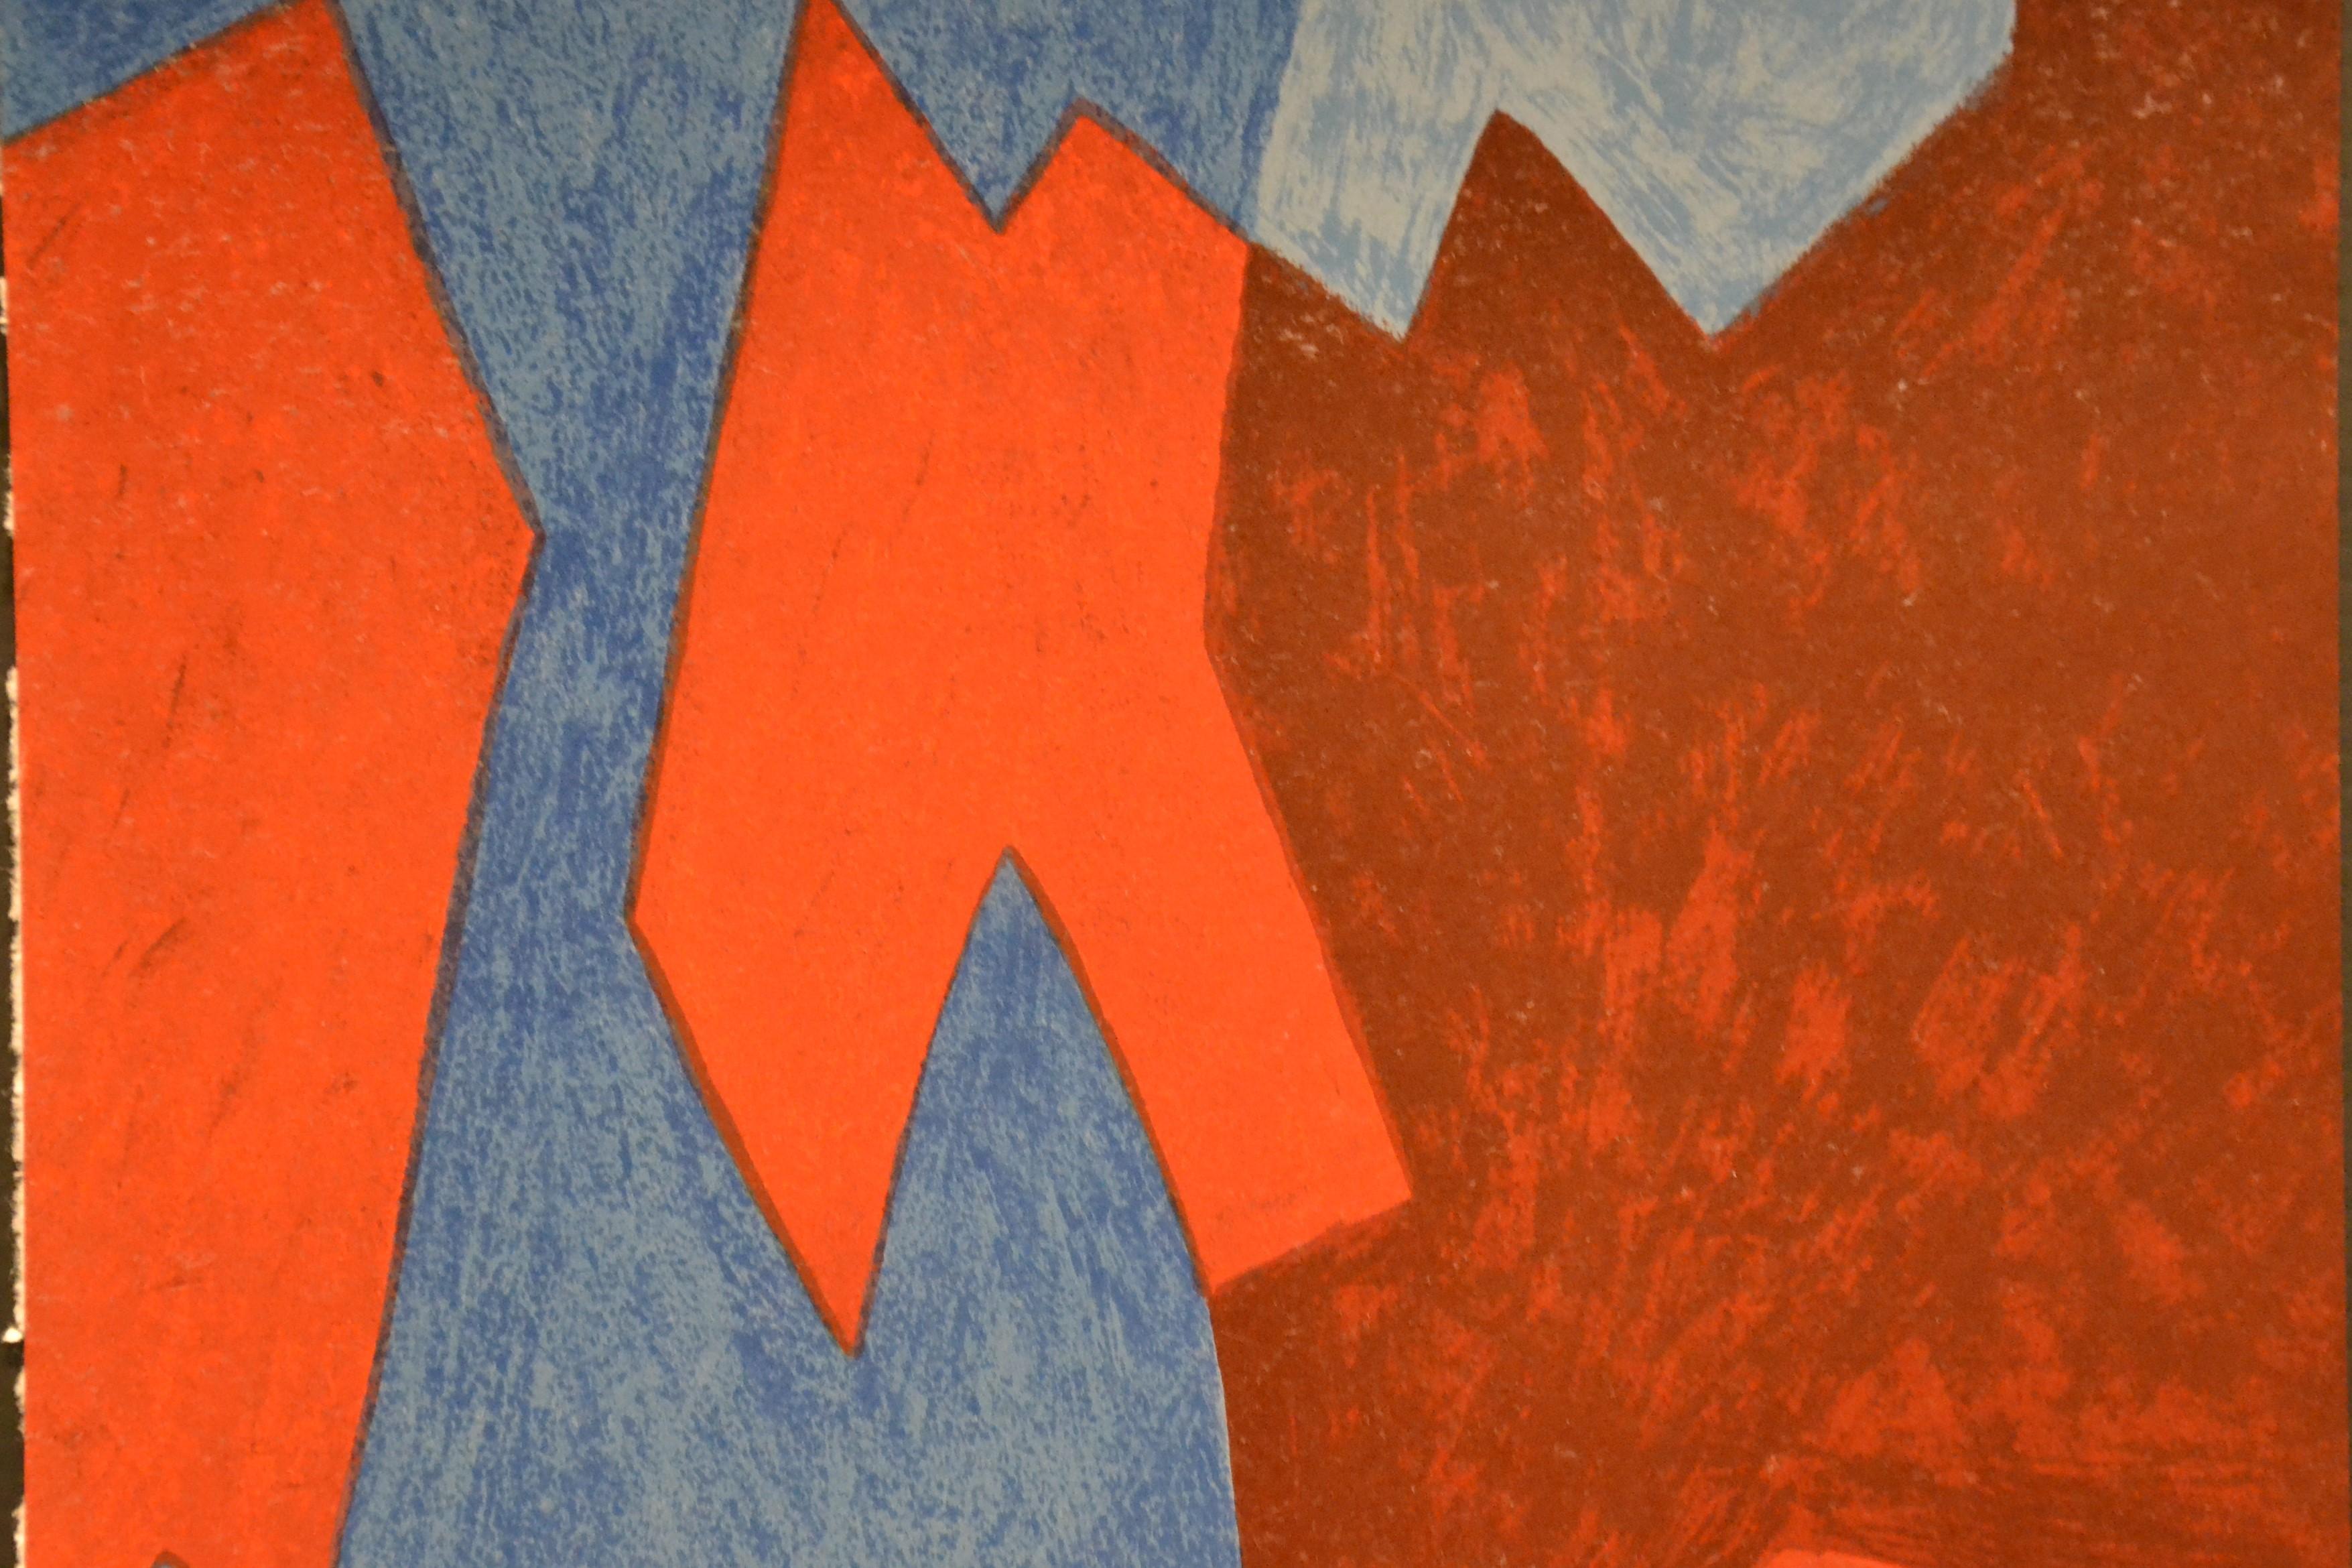 Blue And Red Composition   - Original Lithograph by Serge Poliakoff - 1968 1